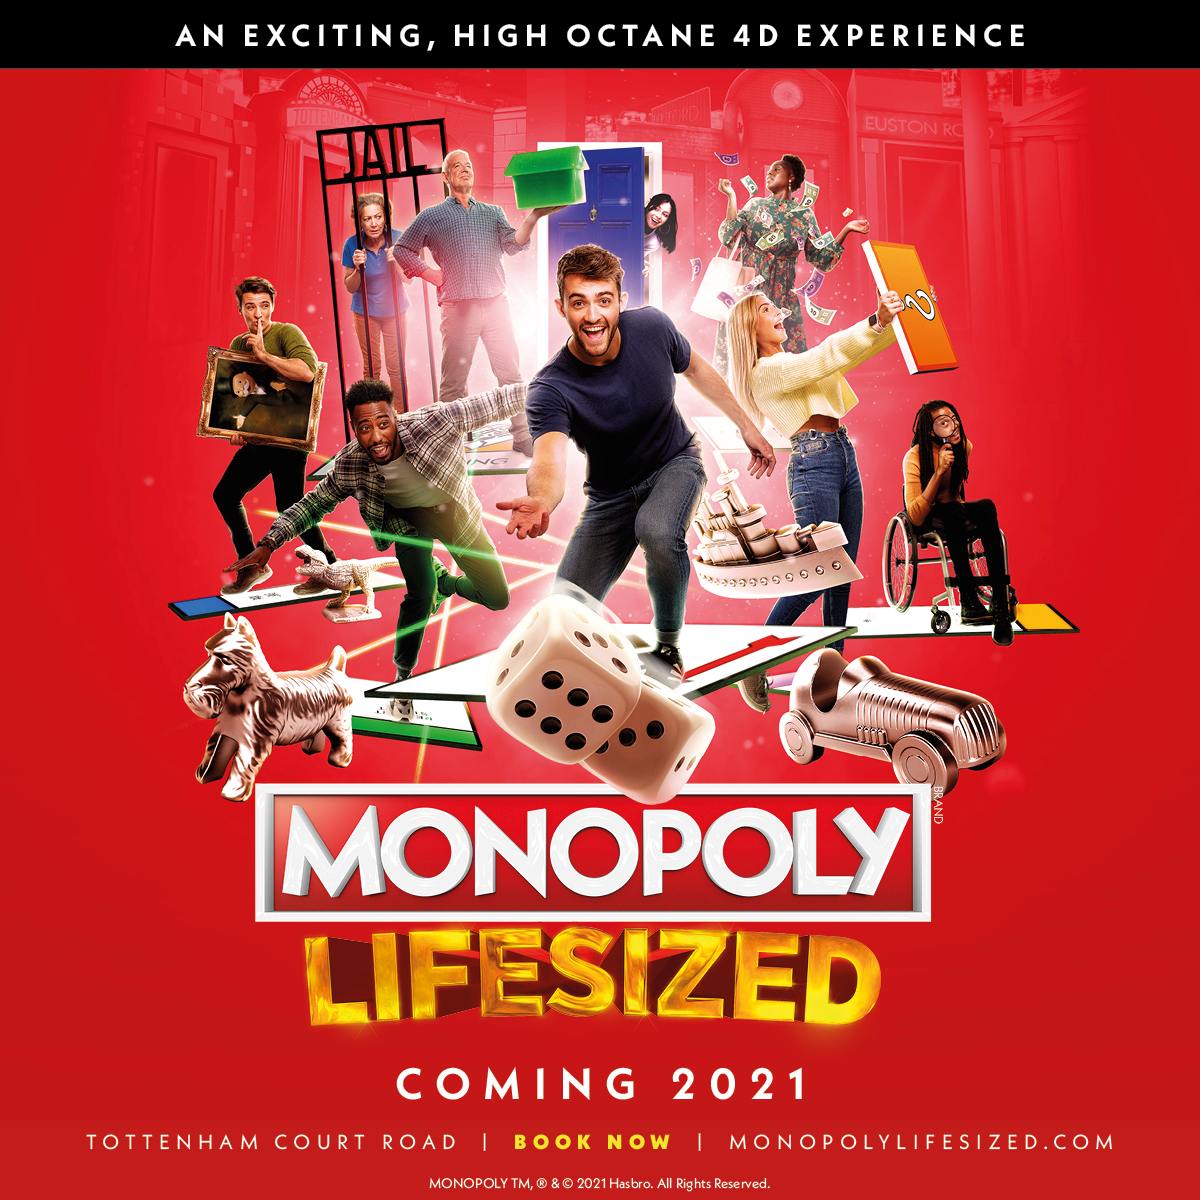 Monopoly Lifesized a brand new challenge attraction in London